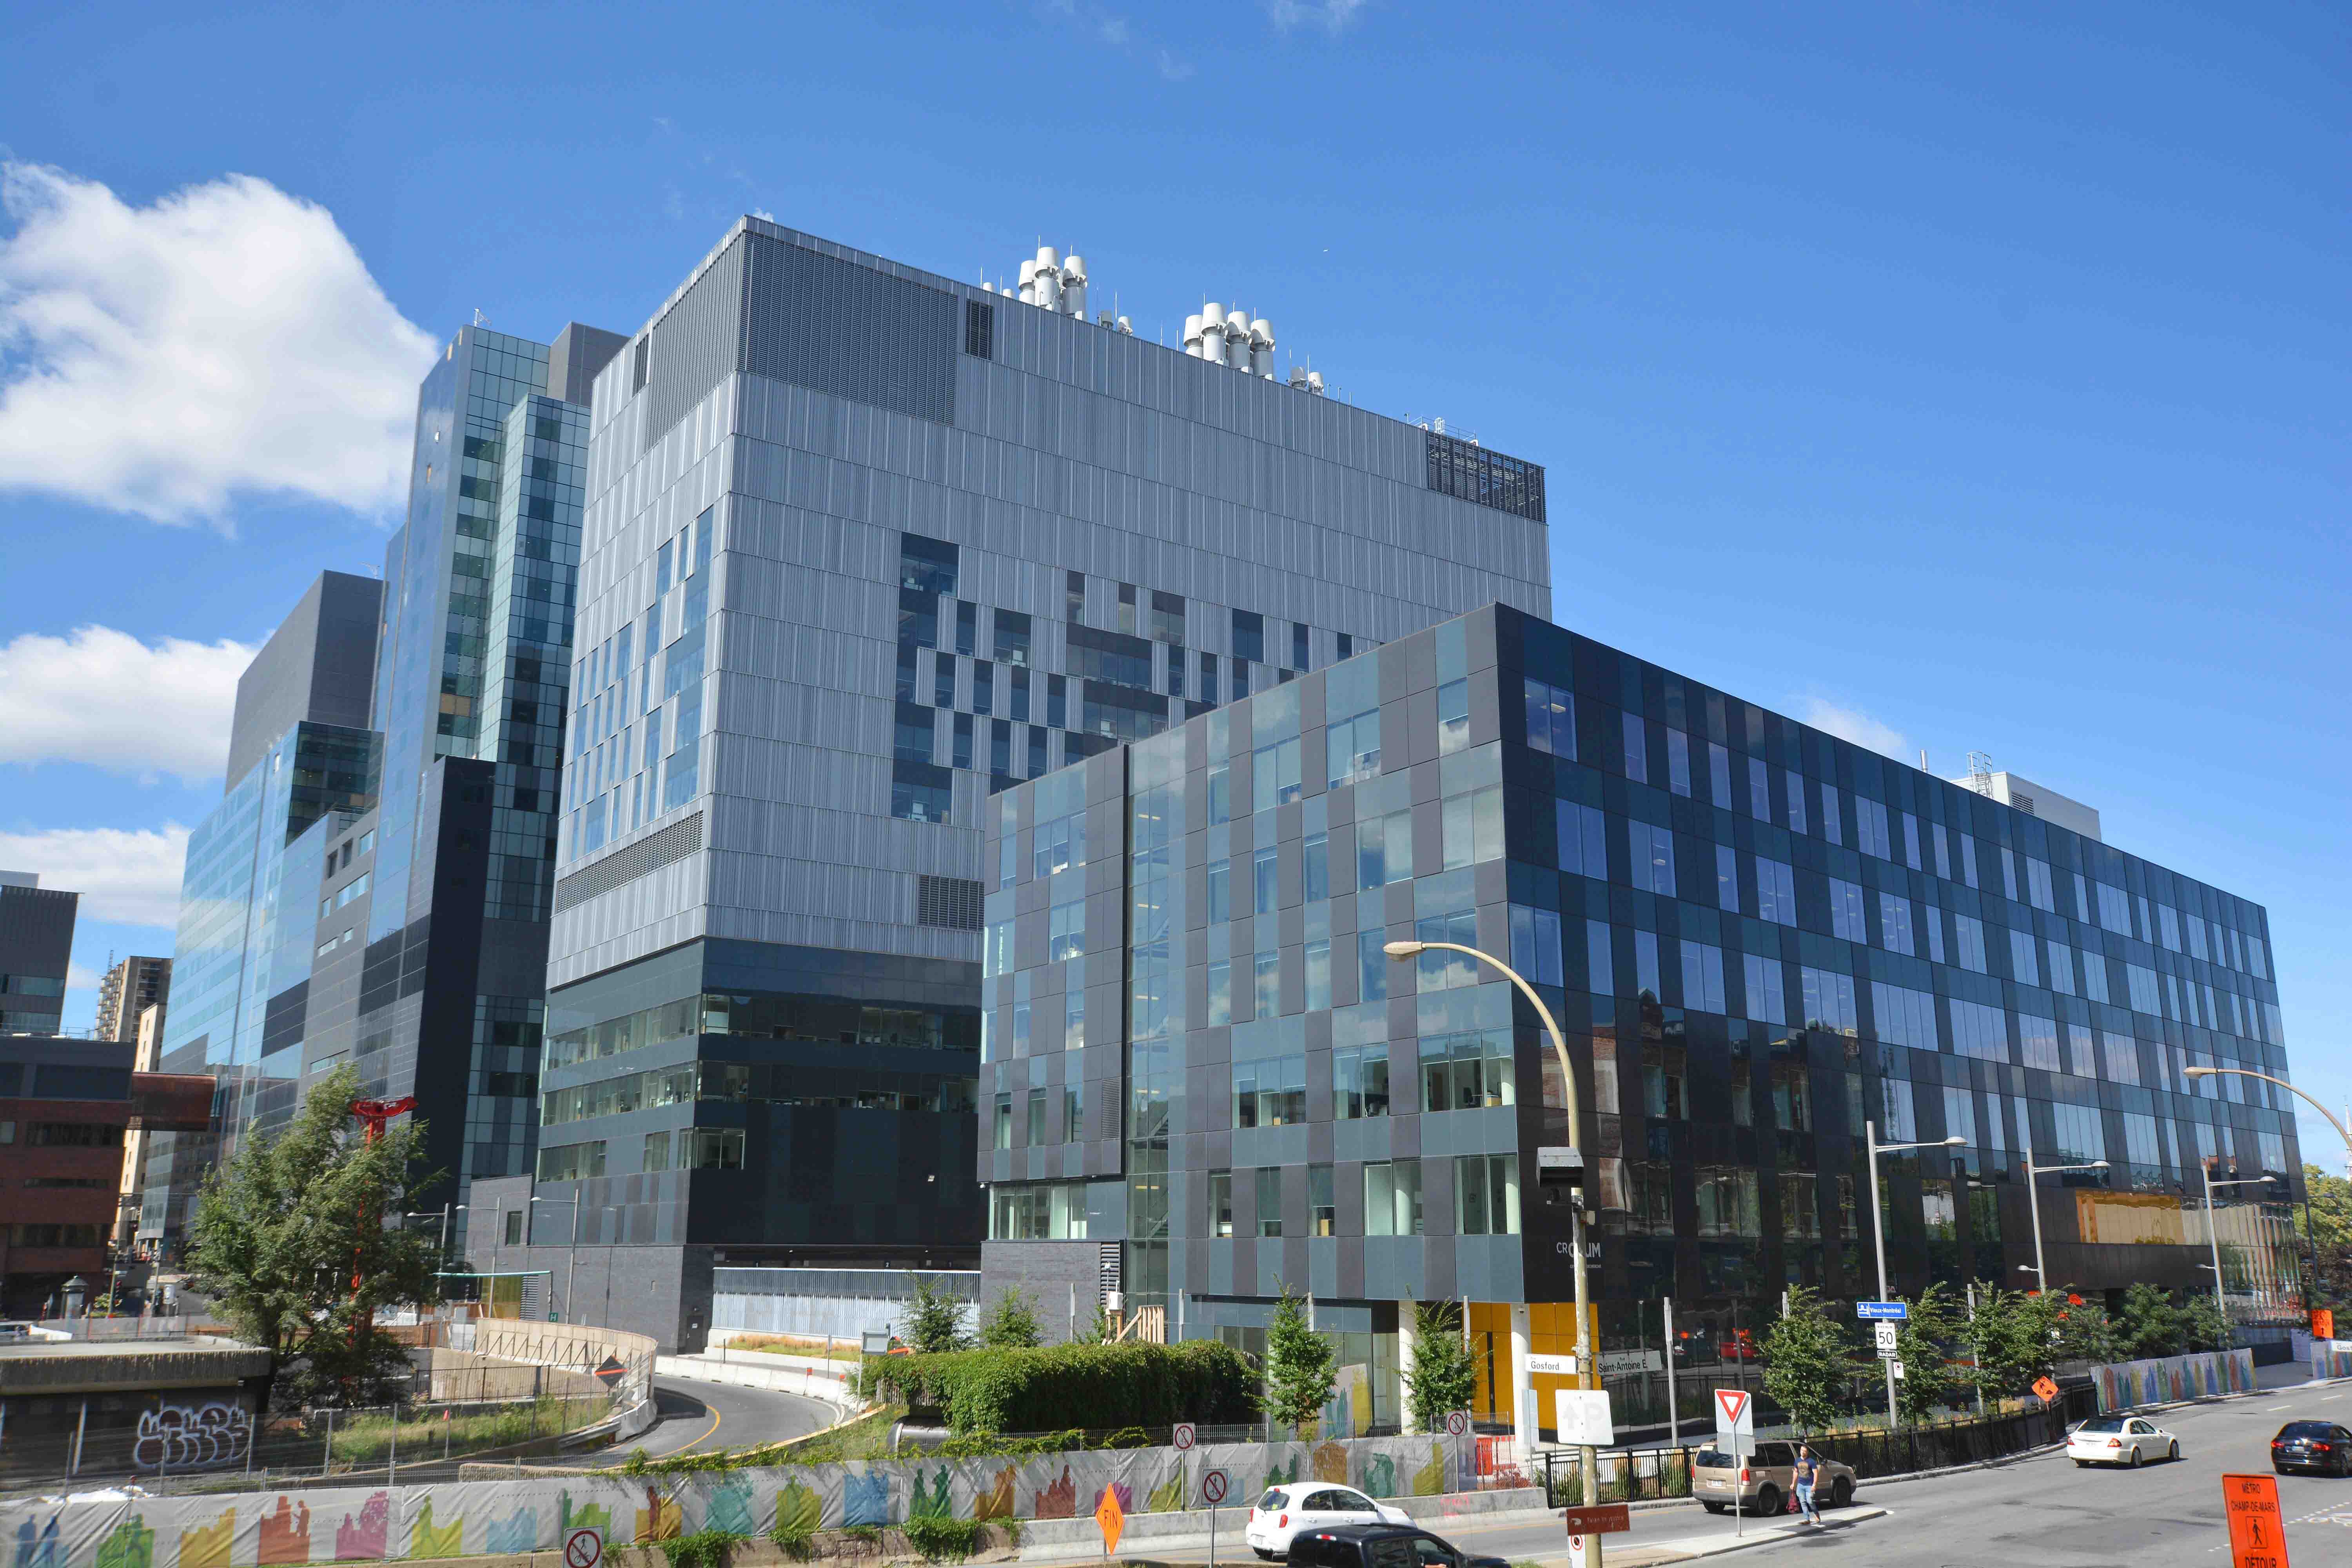 Montreal's CHUM hospital, an employer of Hospital Unit Clerks, especially those with Medical Office Assistant and Unit Clerk Diplomas from regulated career colleges